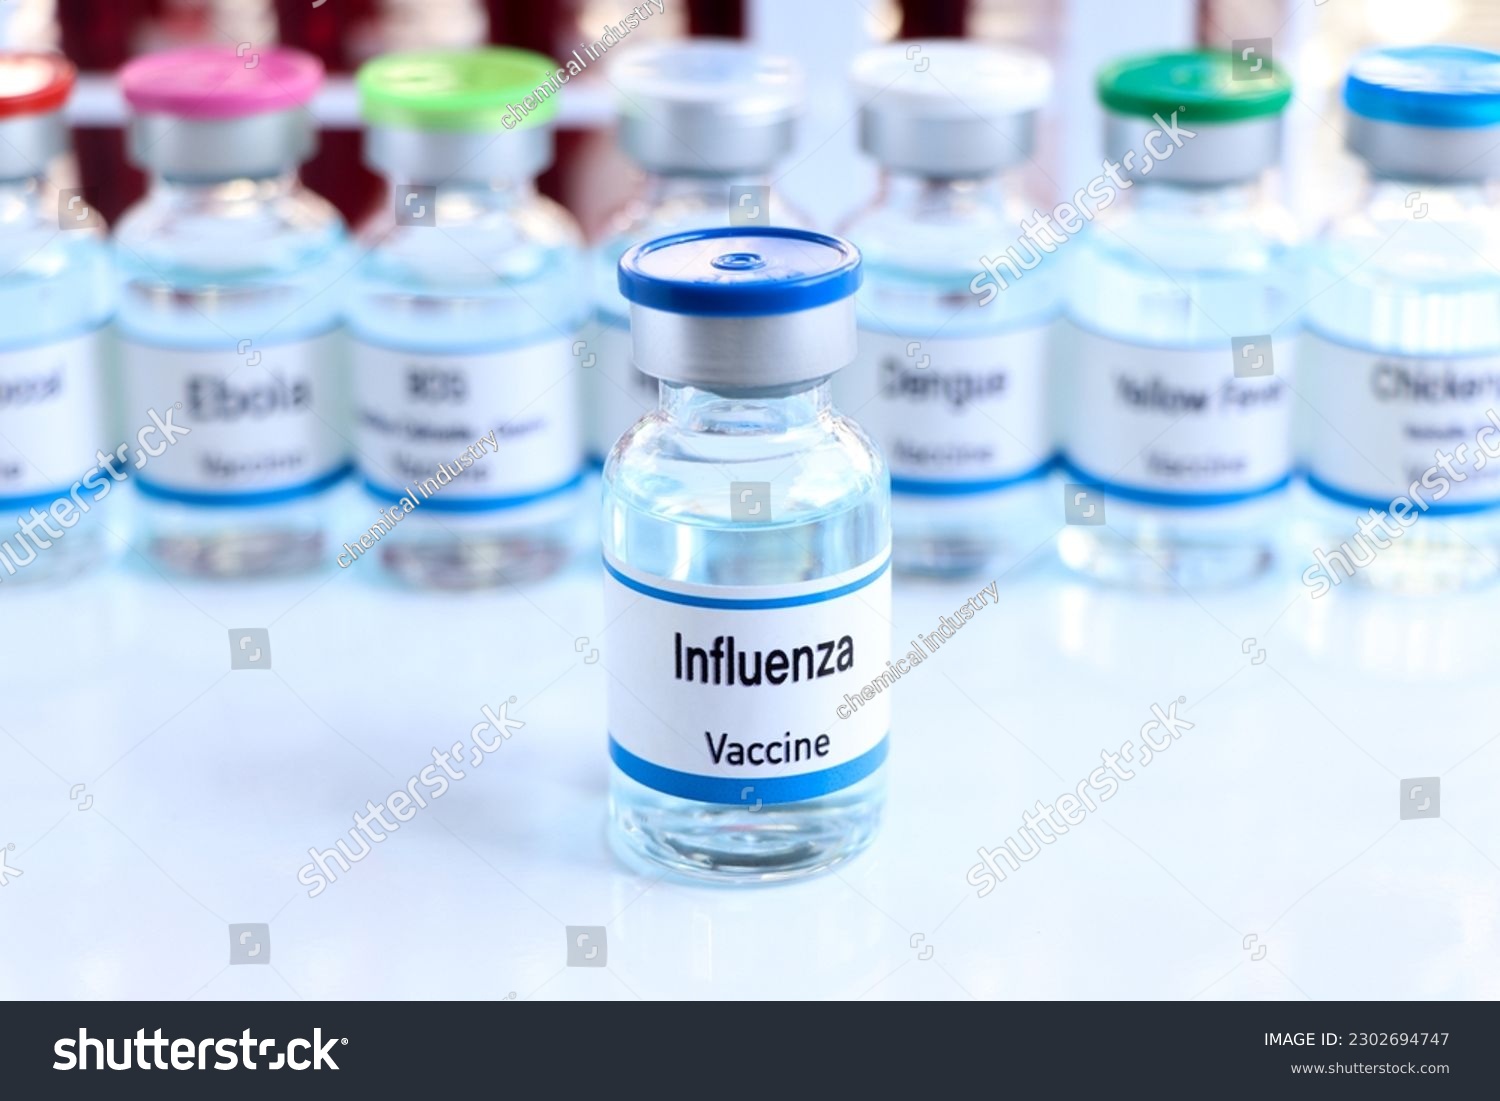 Influenza vaccine in a vial, immunization and treatment of infection, vaccine used for disease prevention #2302694747